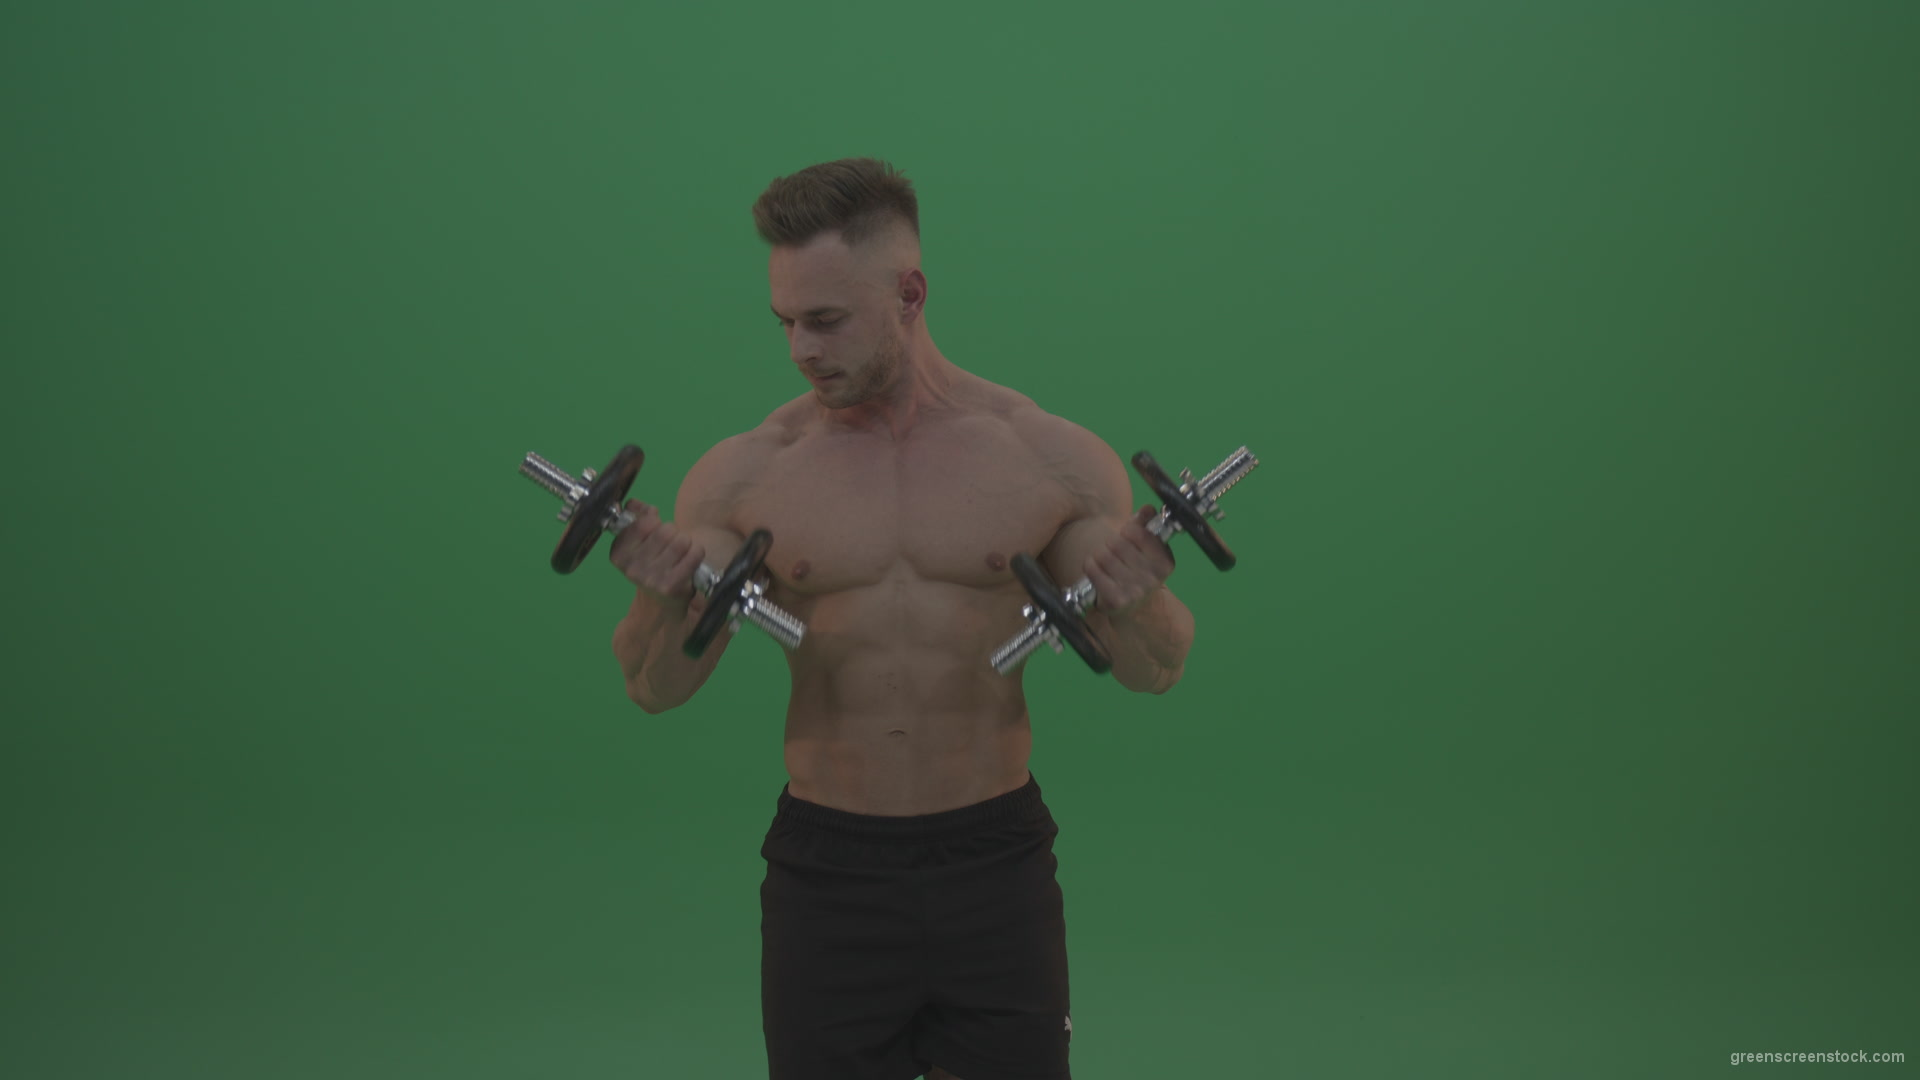 Young_Athlete_Doing_Two_Handed_Dumbbell_Push_Ups_Exercises_Workout_On_Green_Screen_Chroma_Key_Wall_Background_005 Green Screen Stock